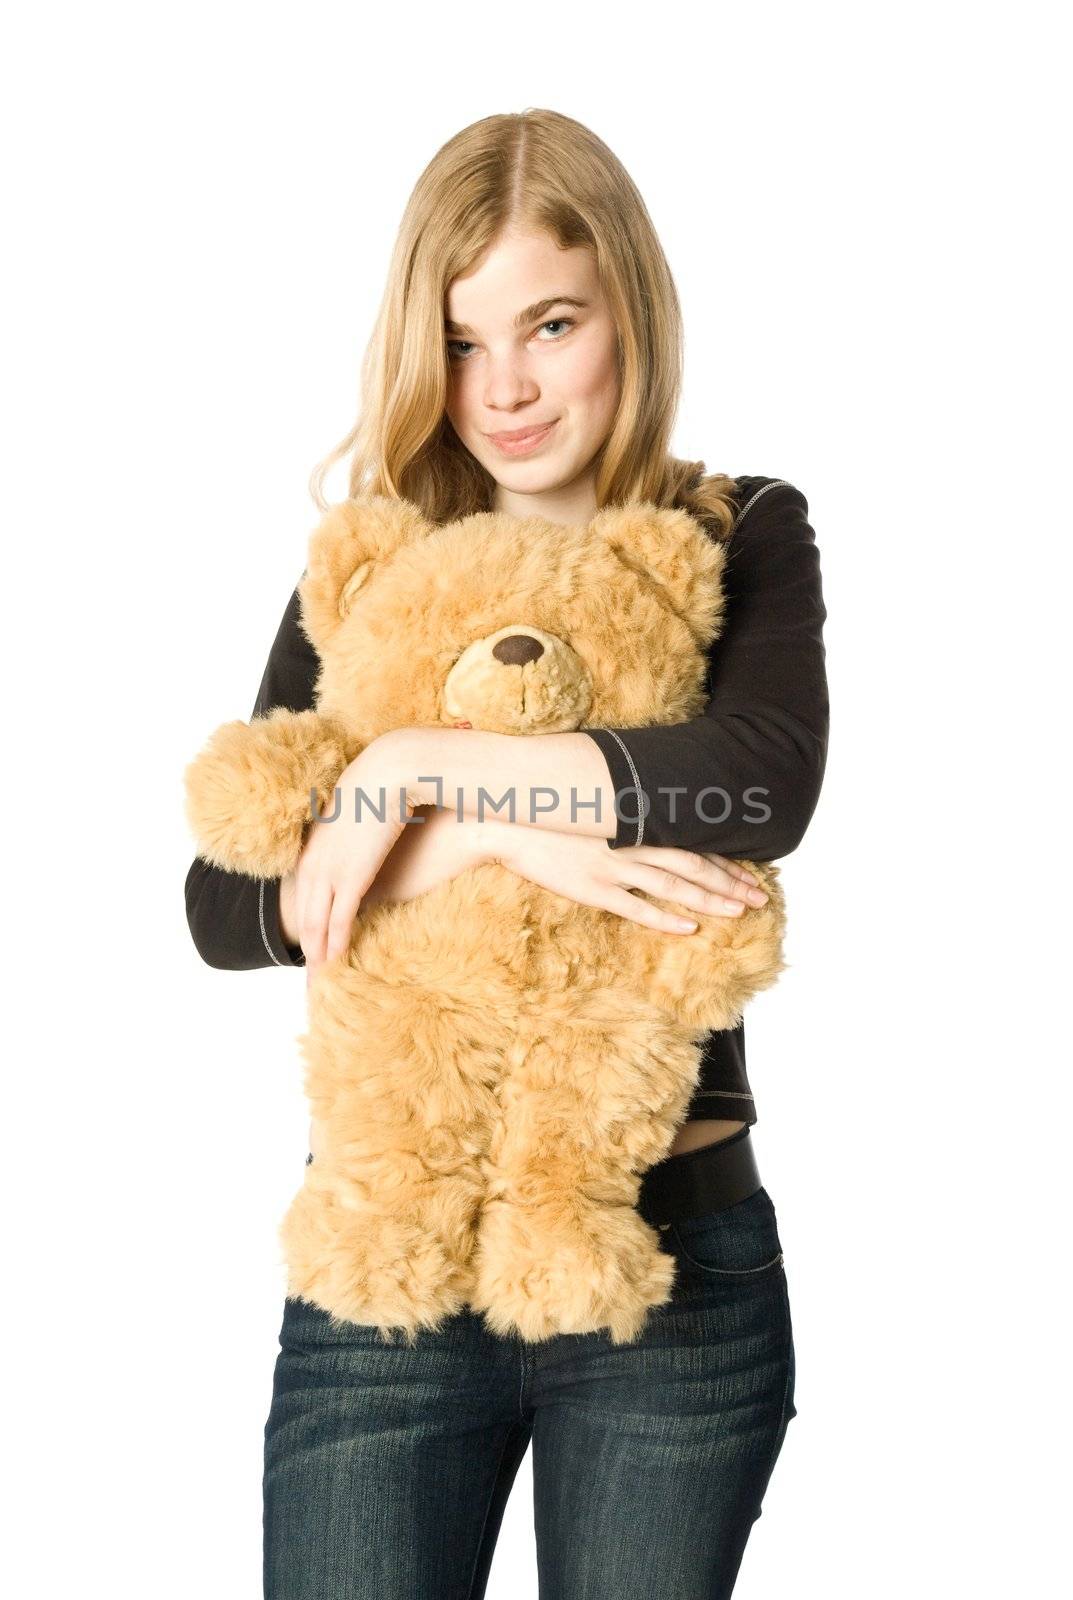 Young girl hugging a teddy bear, isolated